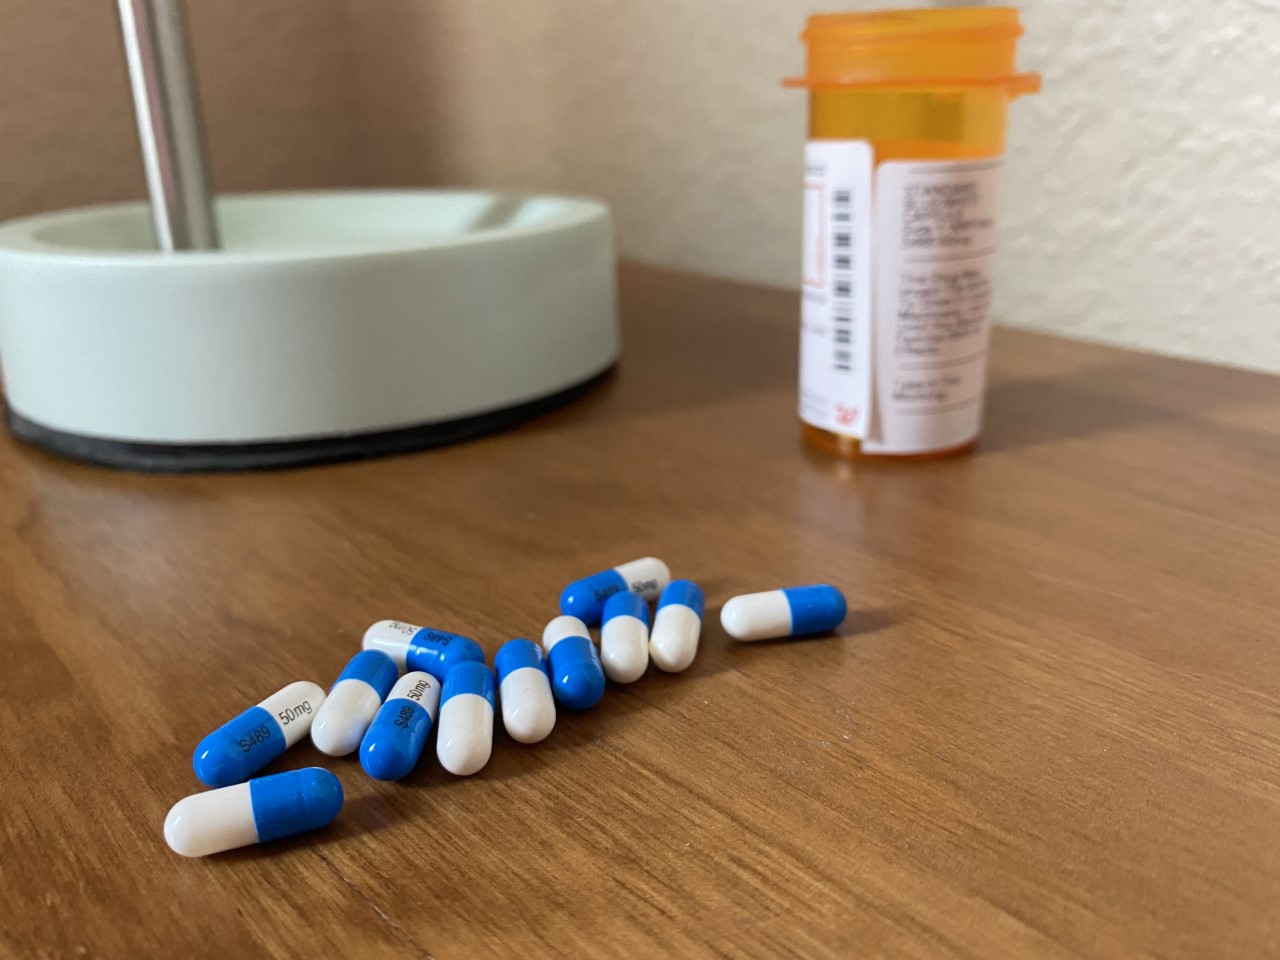 A photo of ADHD medication pills on a table.